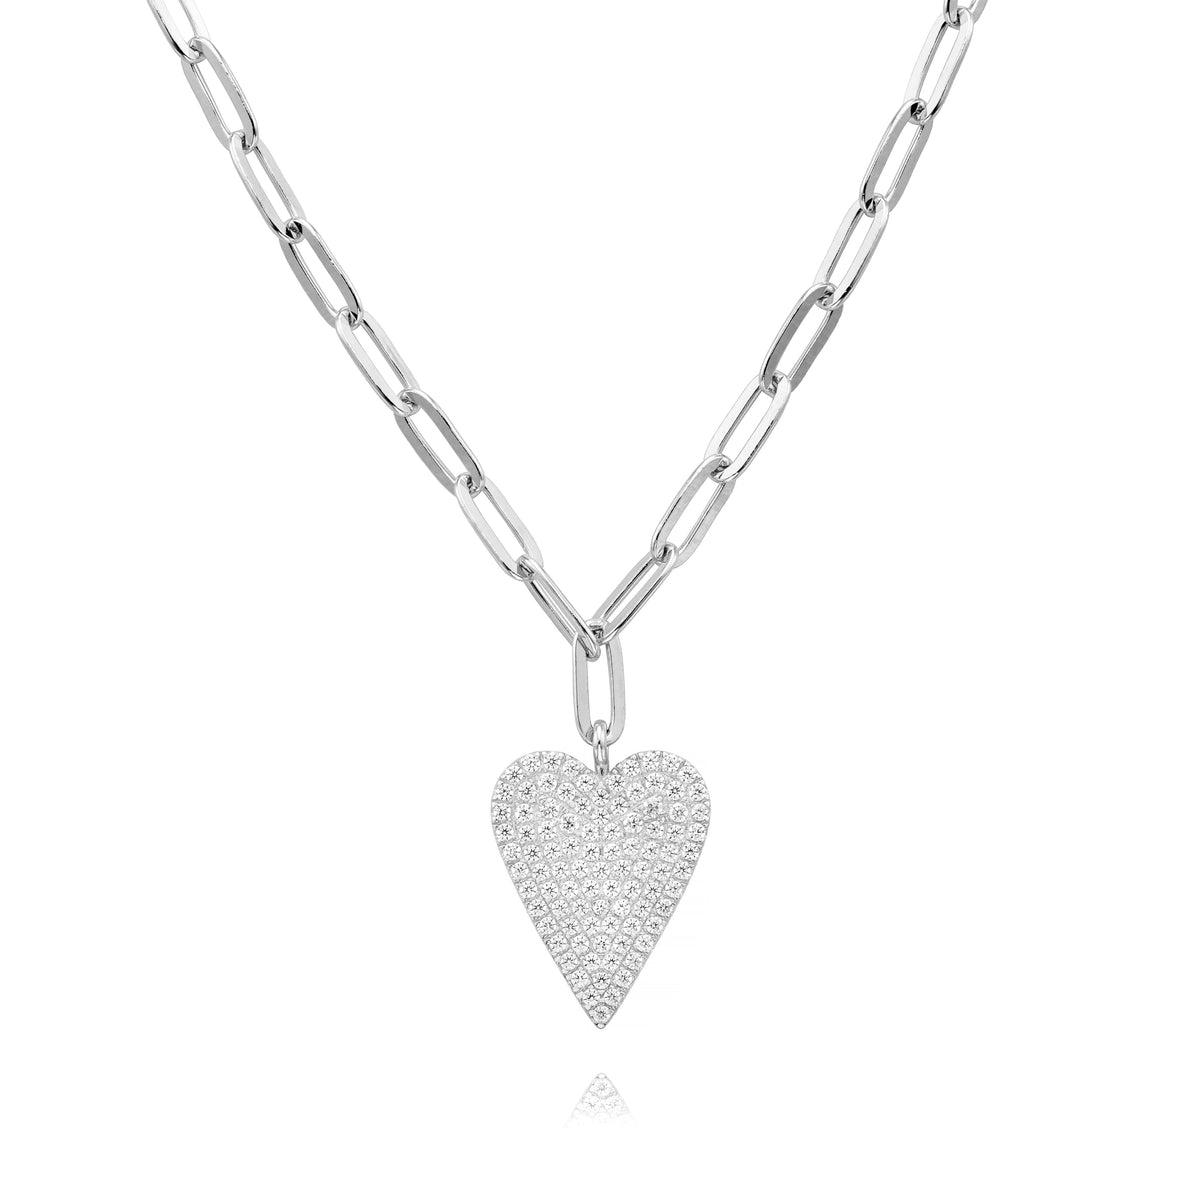 Large Sharp Heart Necklace in White